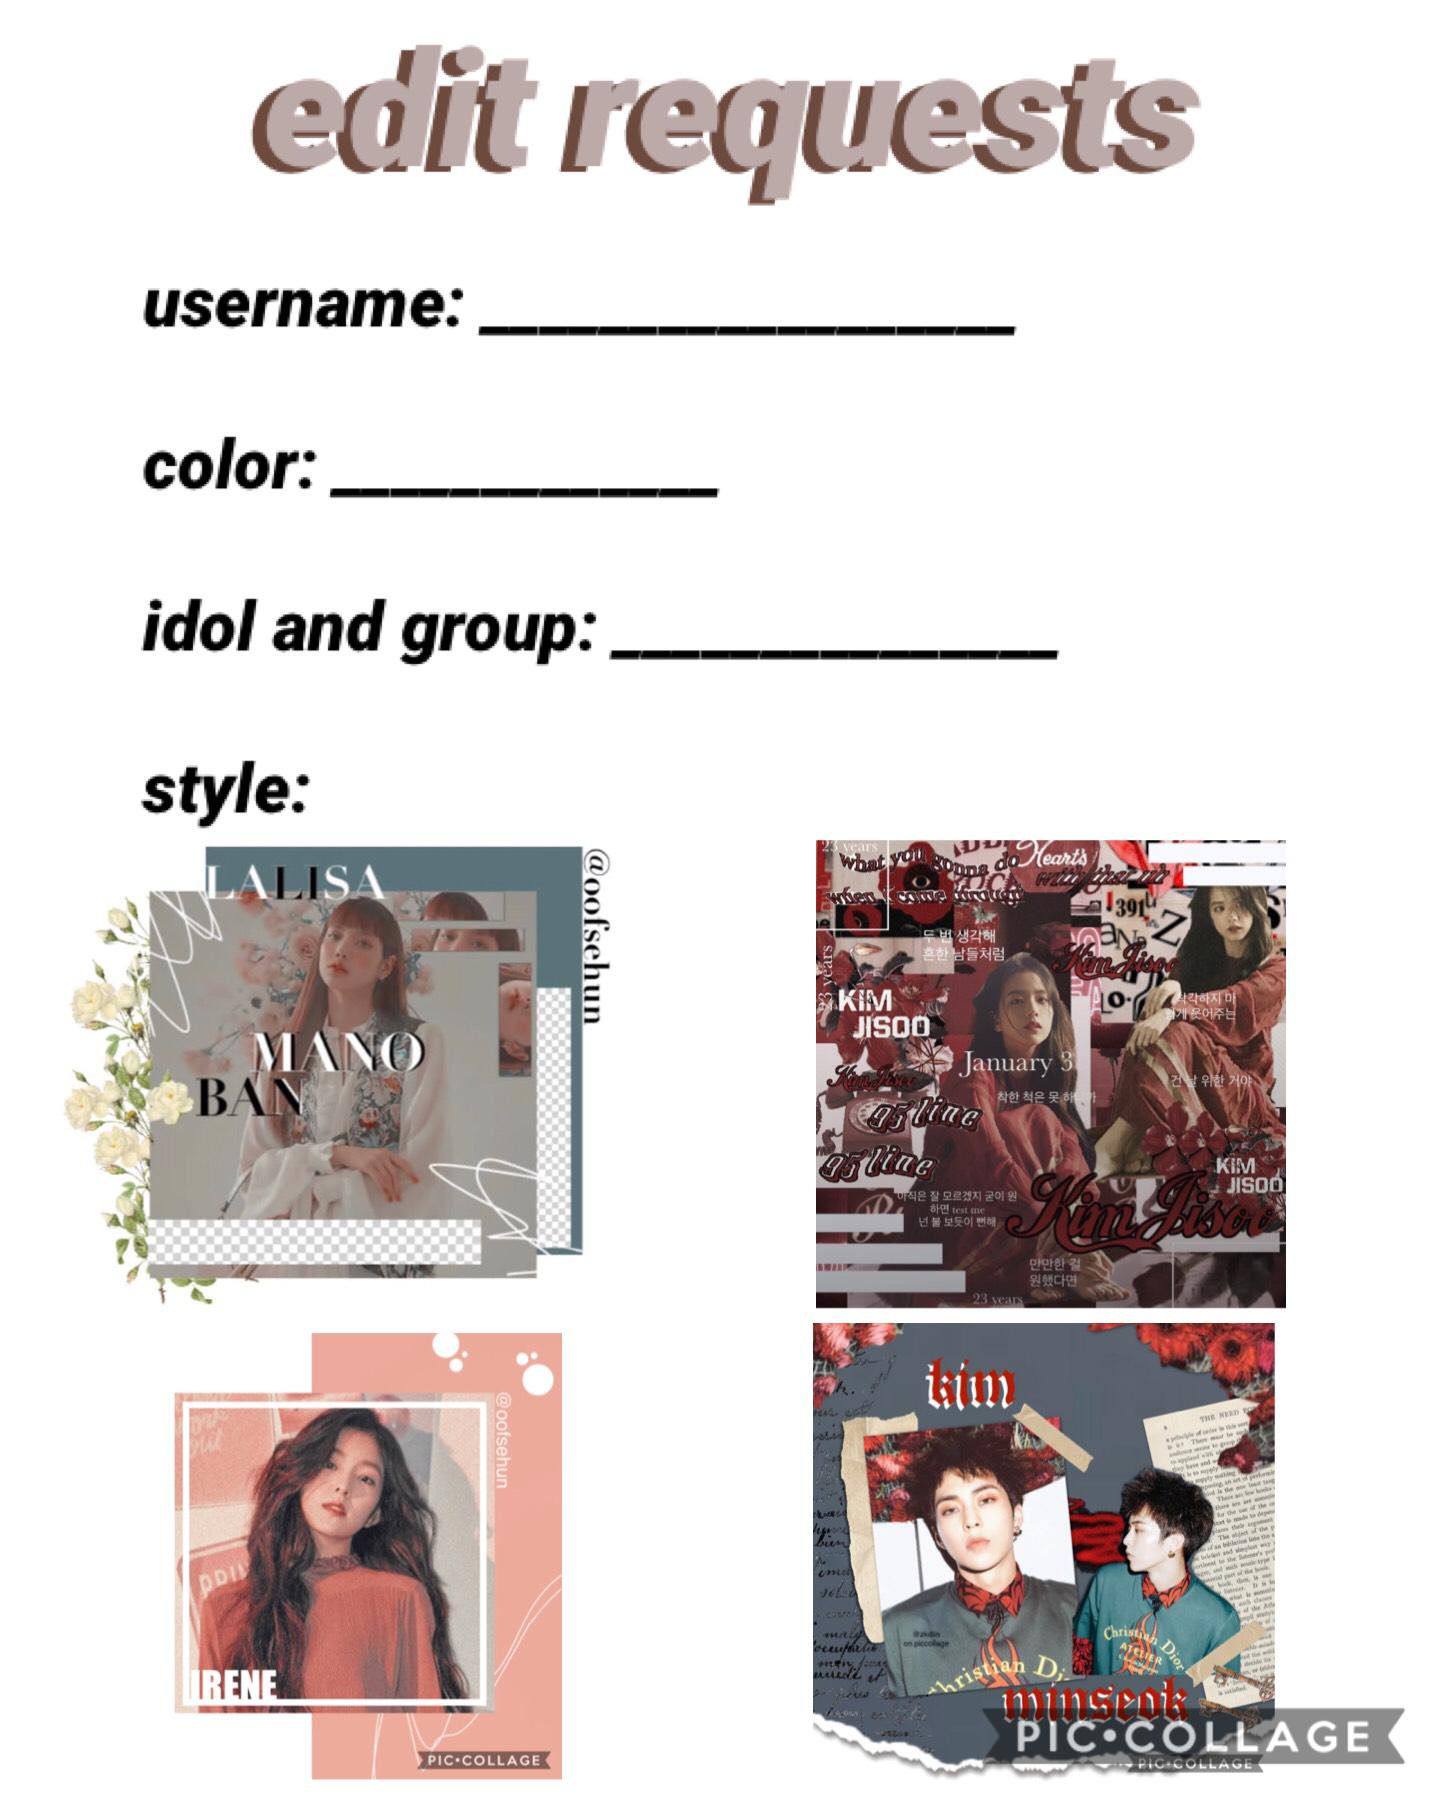 tap
everyone is doing this so ksksk why not

IMPORTANT:
1st style looks better with dark colors,
2nd: any color ig
3rd: pastel colors

:)